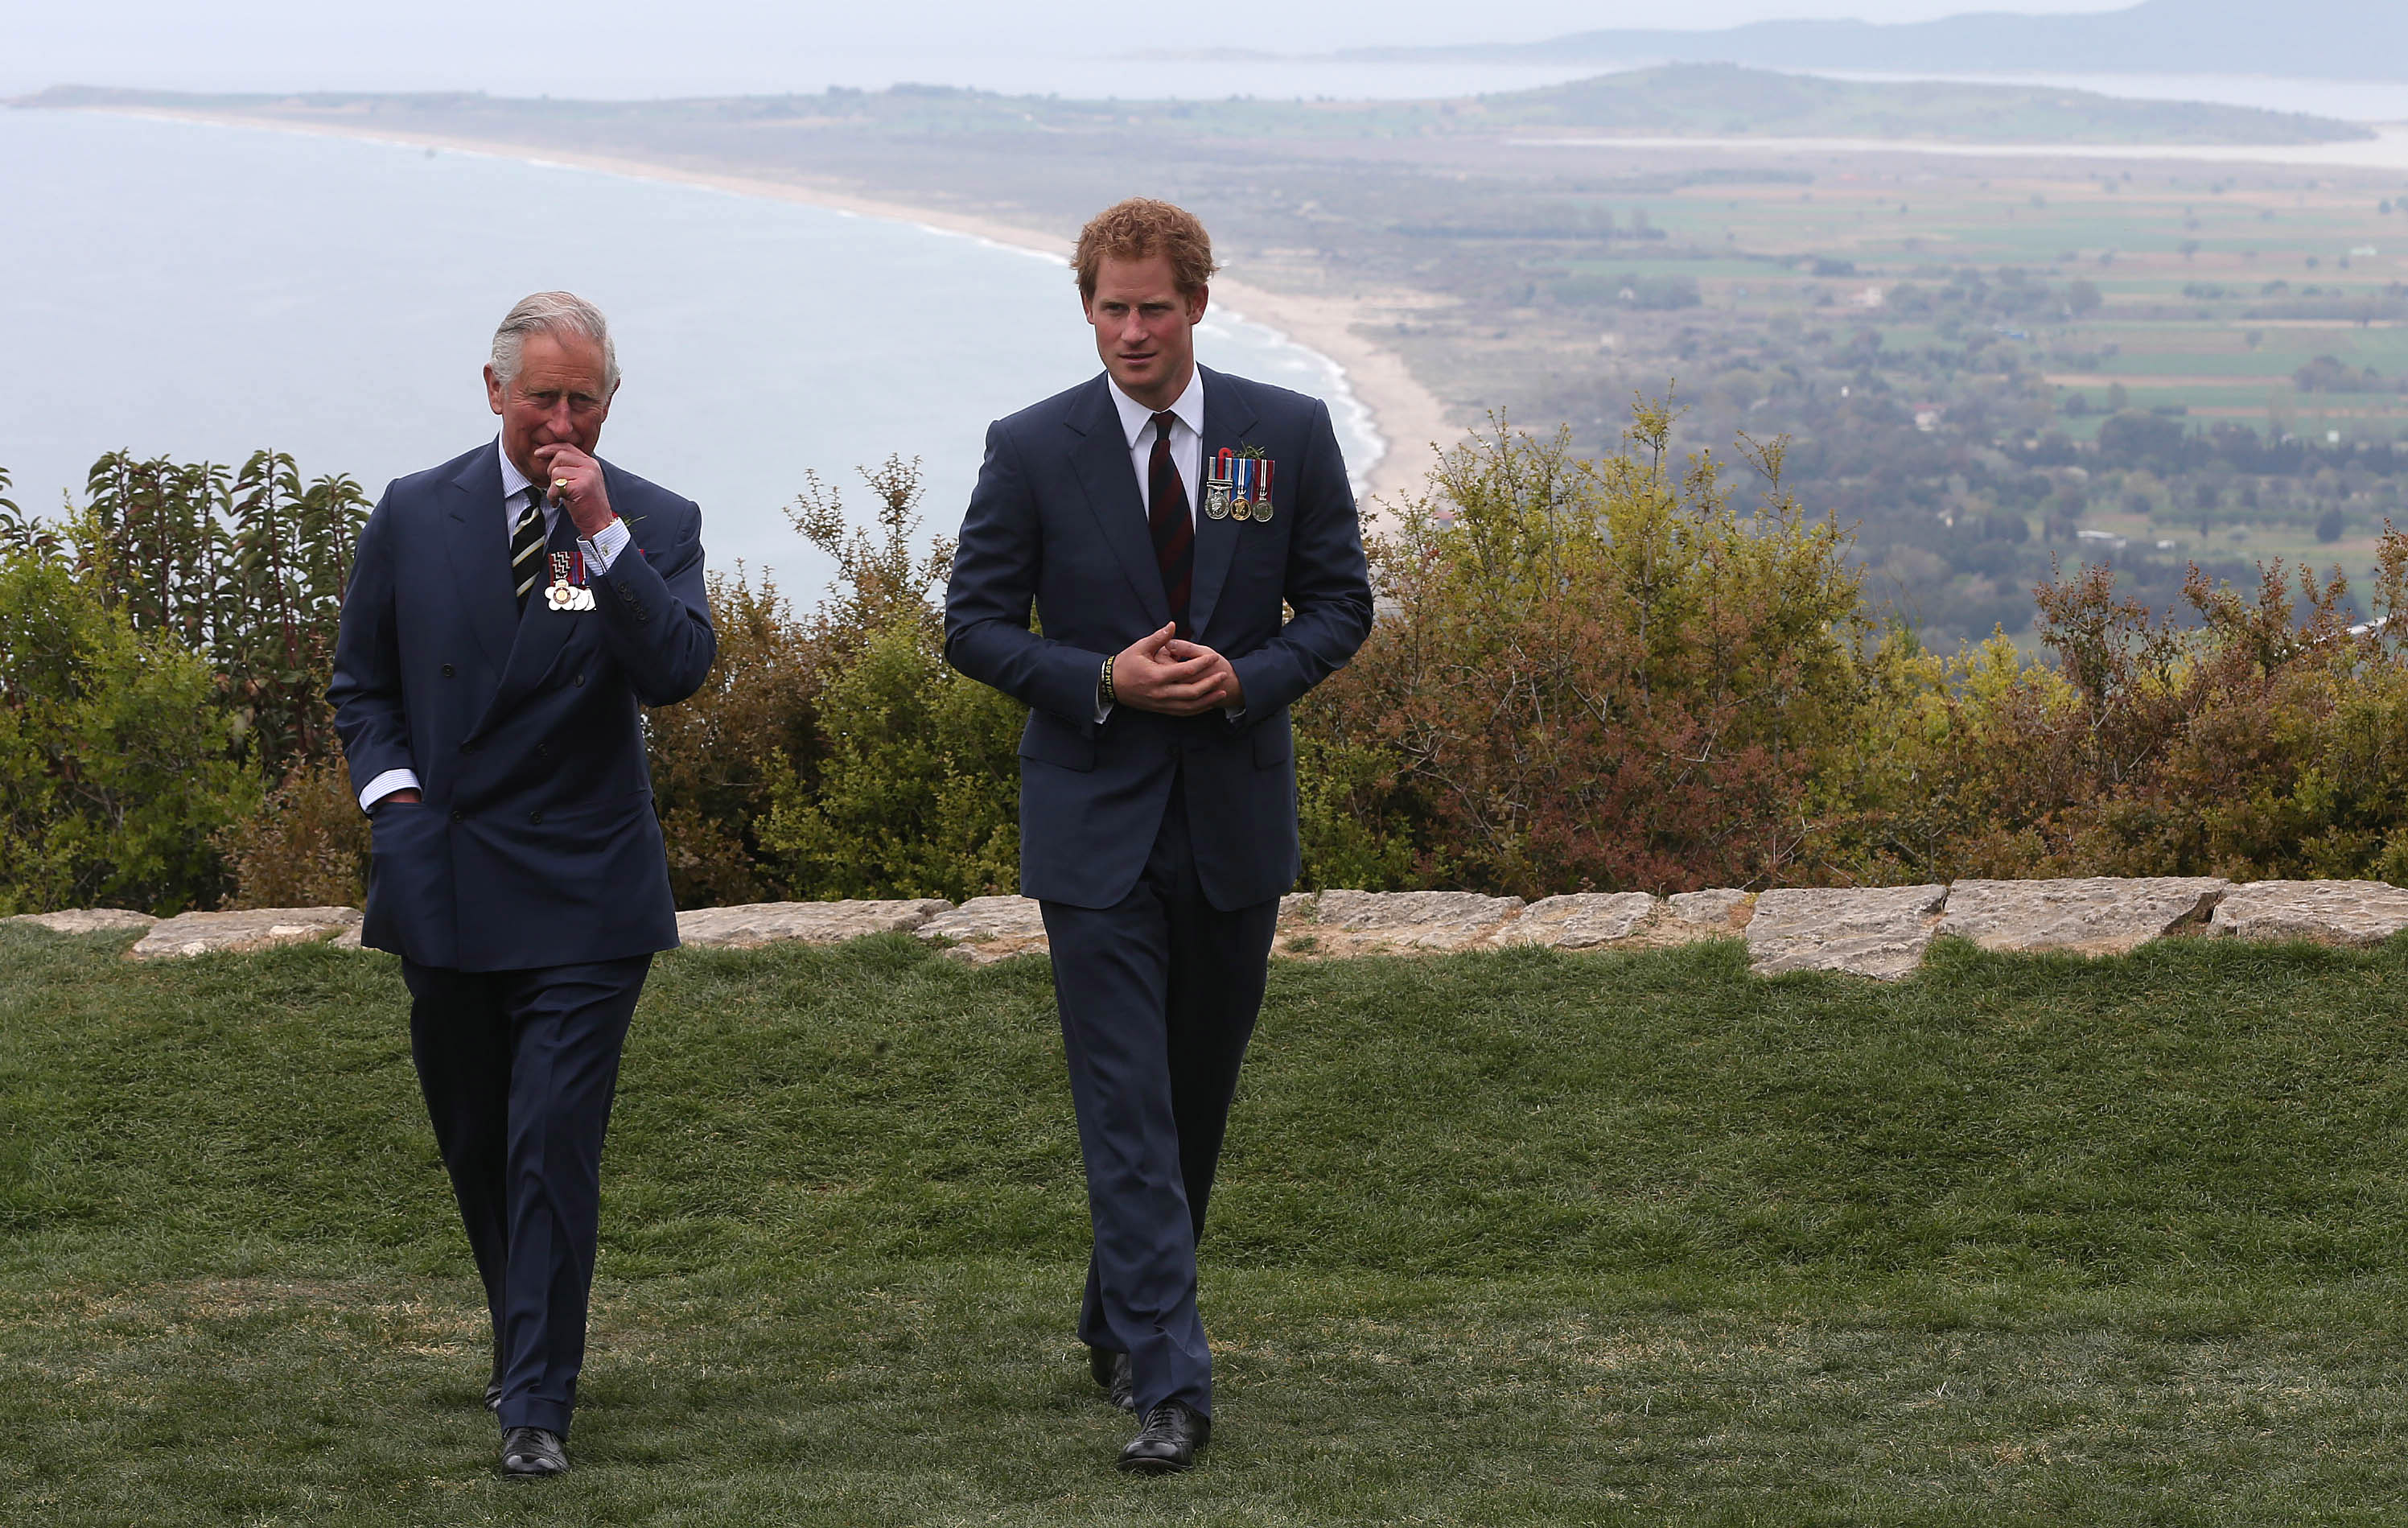 King Charles III and Prince Harry during a visit to The Nek as part of commemorations marking the 100th anniversary of the Battle of Gallipoli on April 25, 2015 in Gallipoli, Turkey. | Source: Getty Images